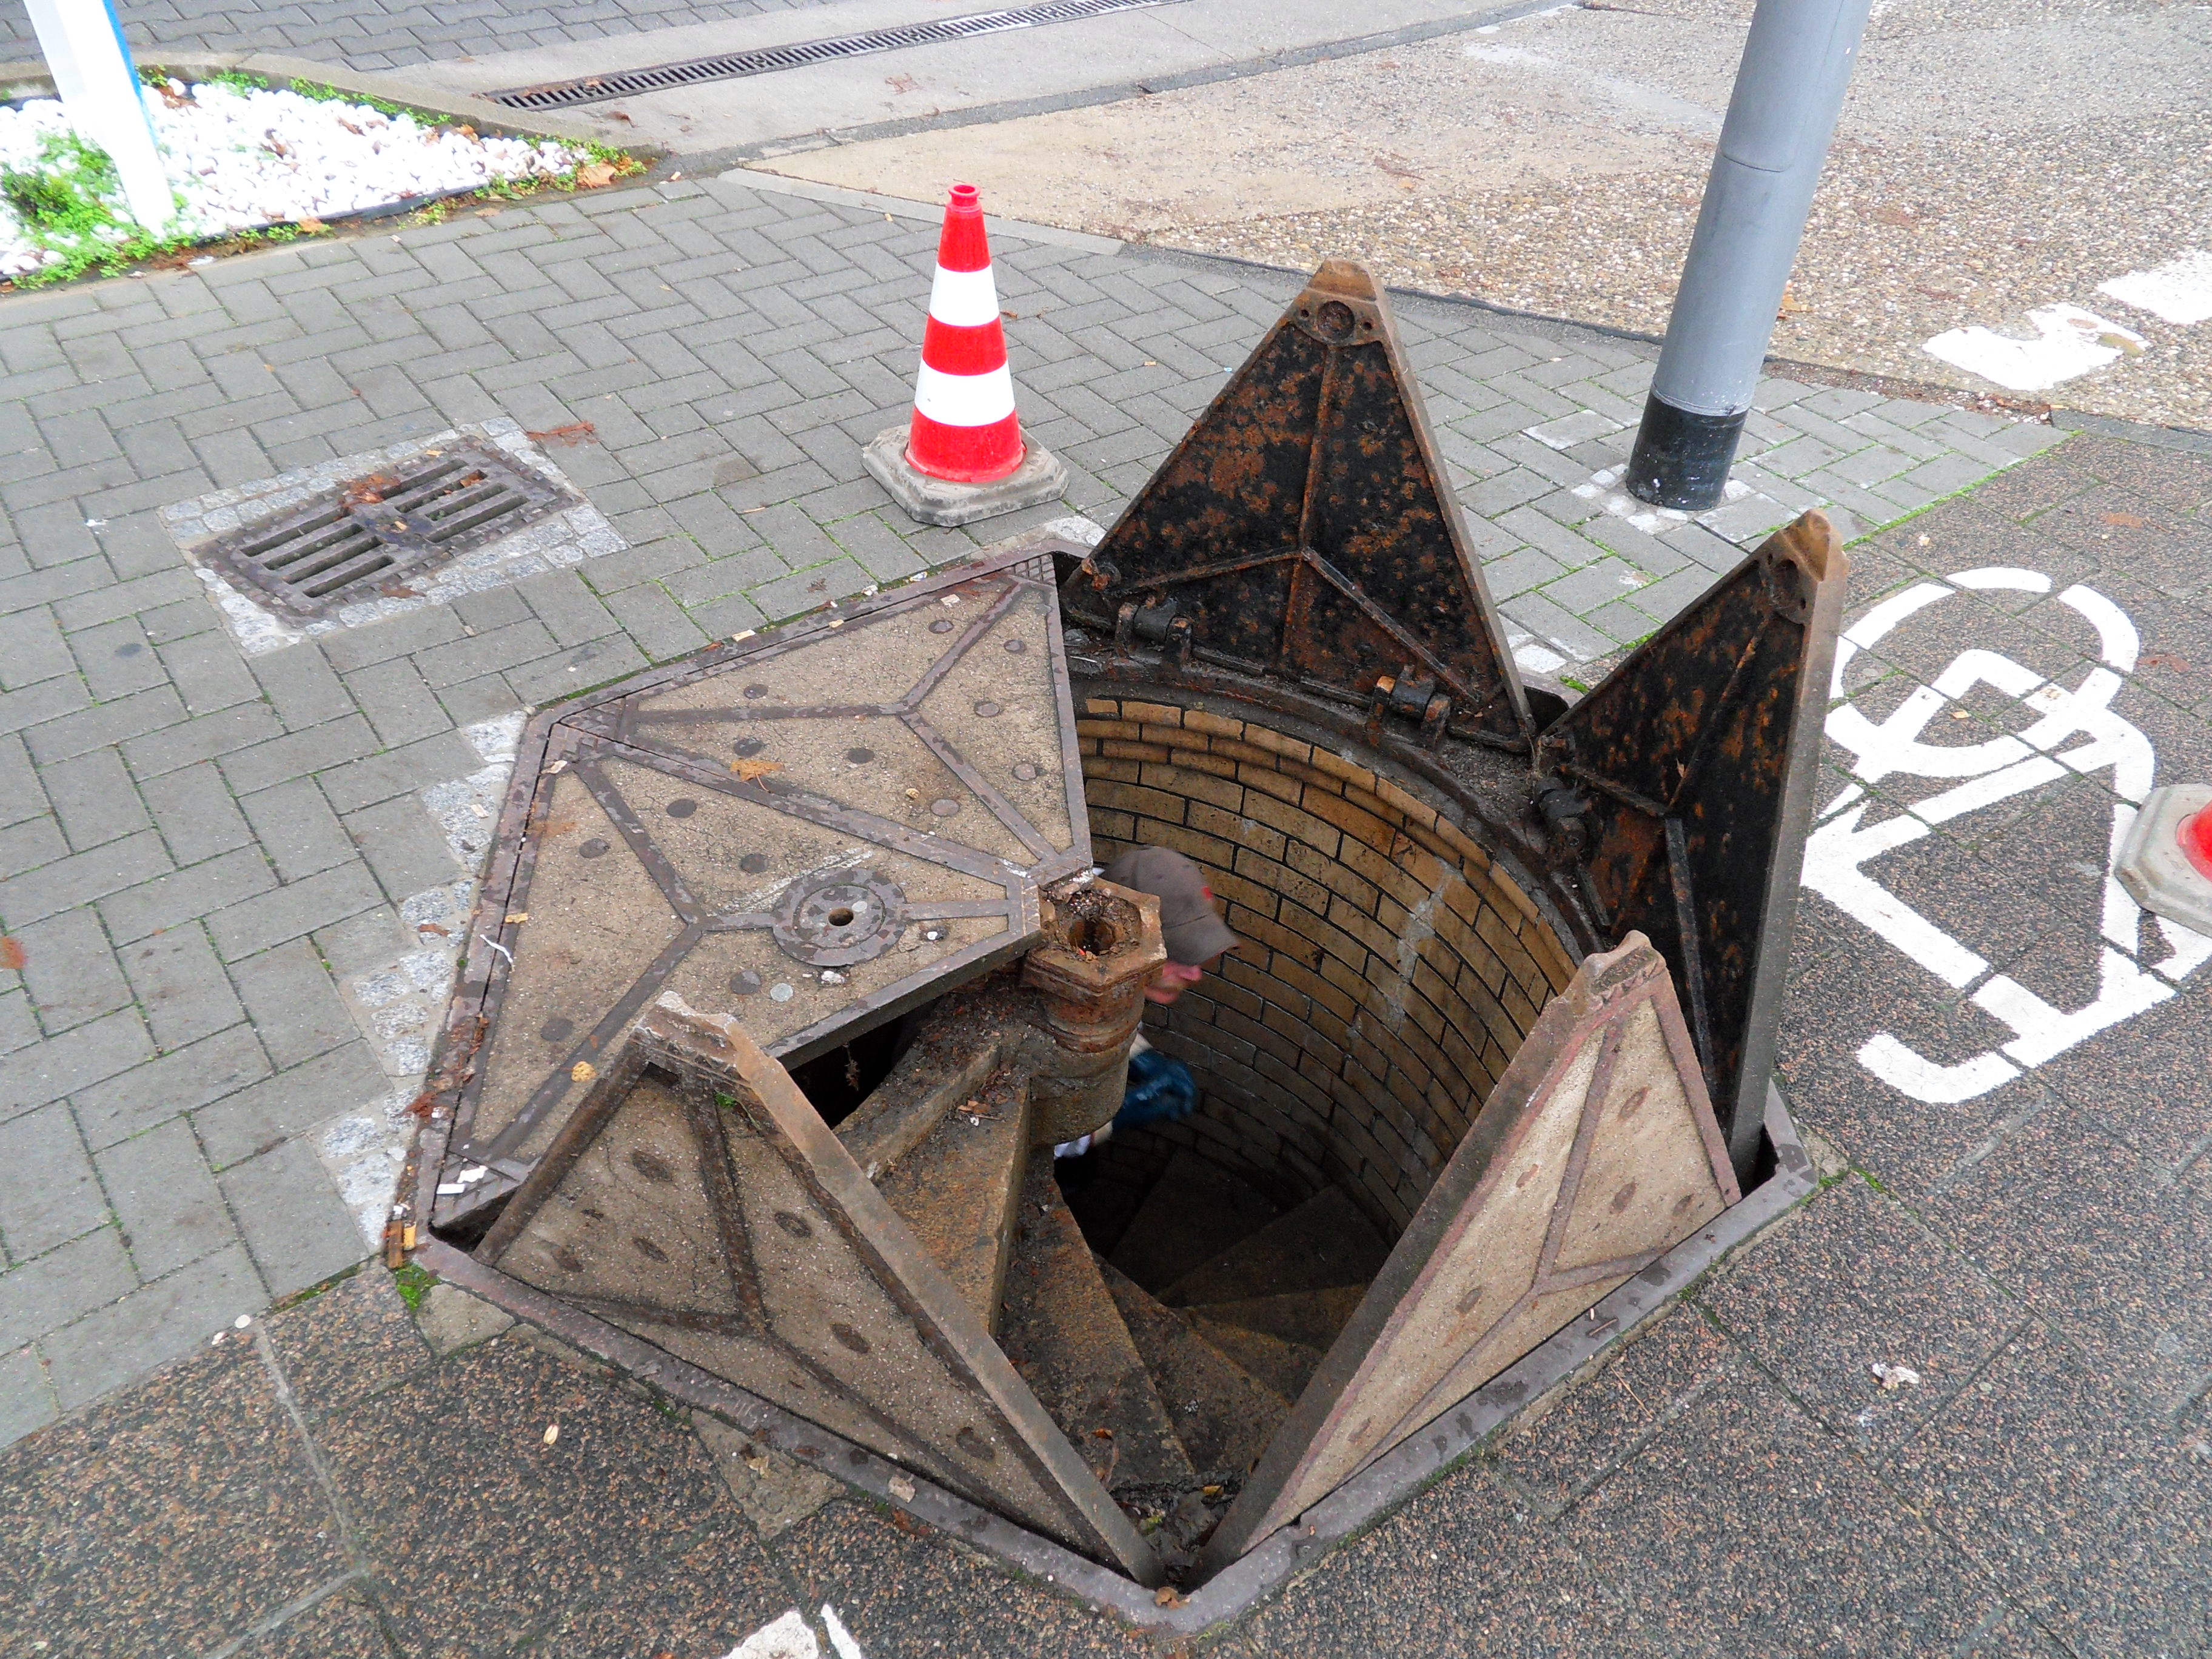 Cool man hole cover in Wiesbaden, Germany